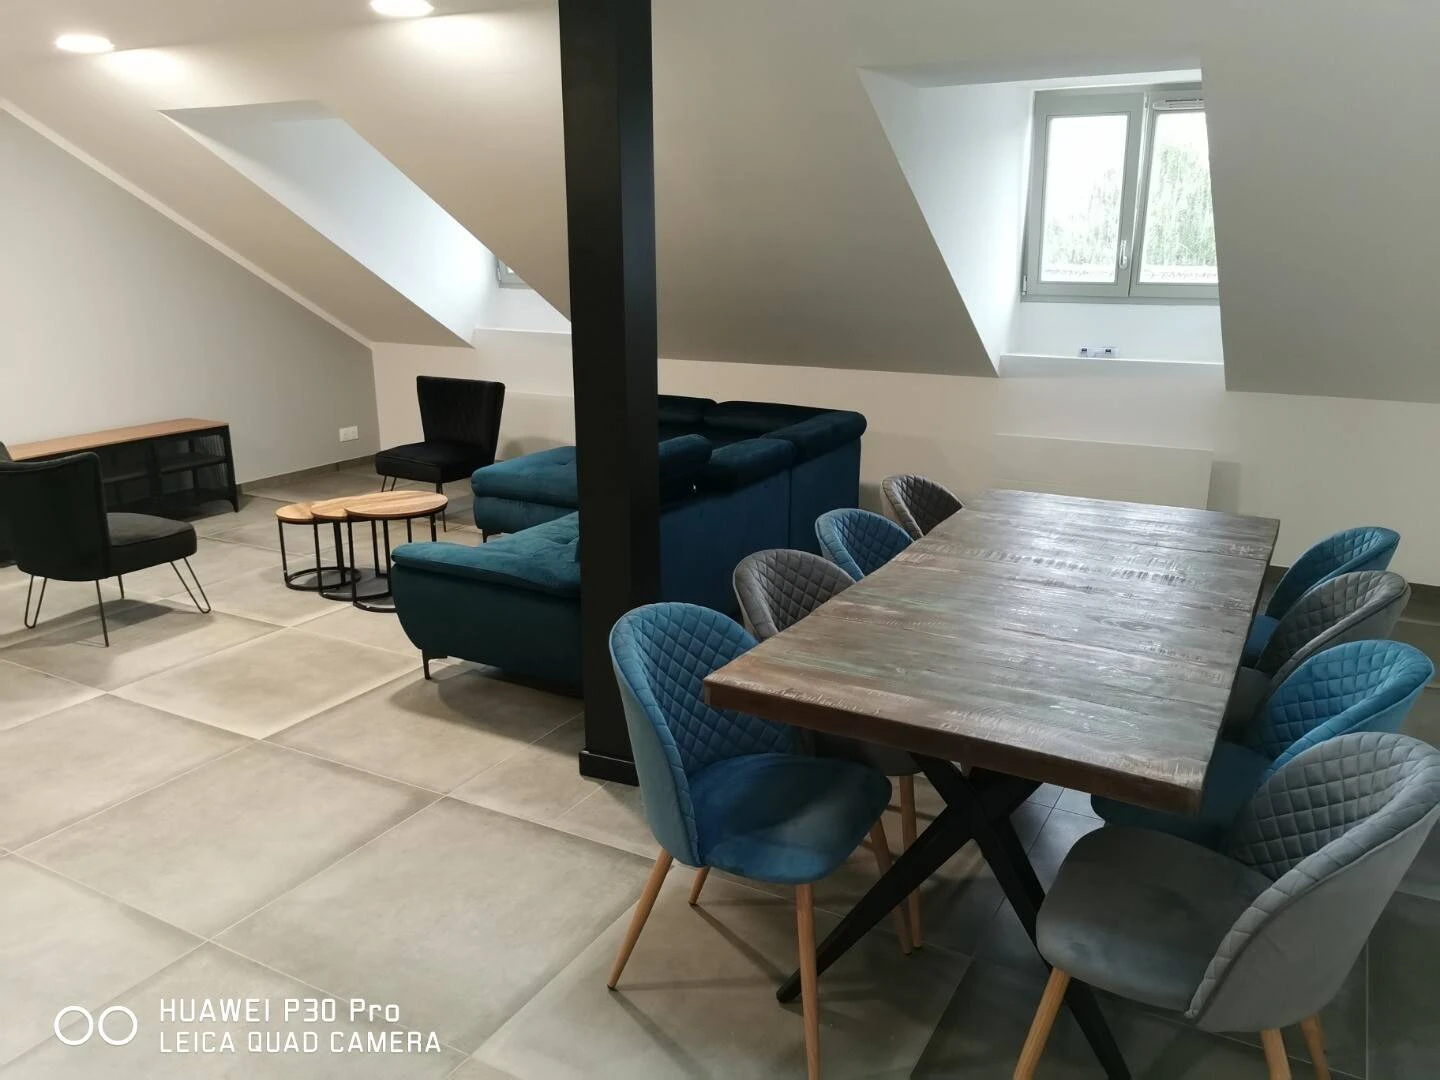 Room for rent in a shared flat in Valenciennes